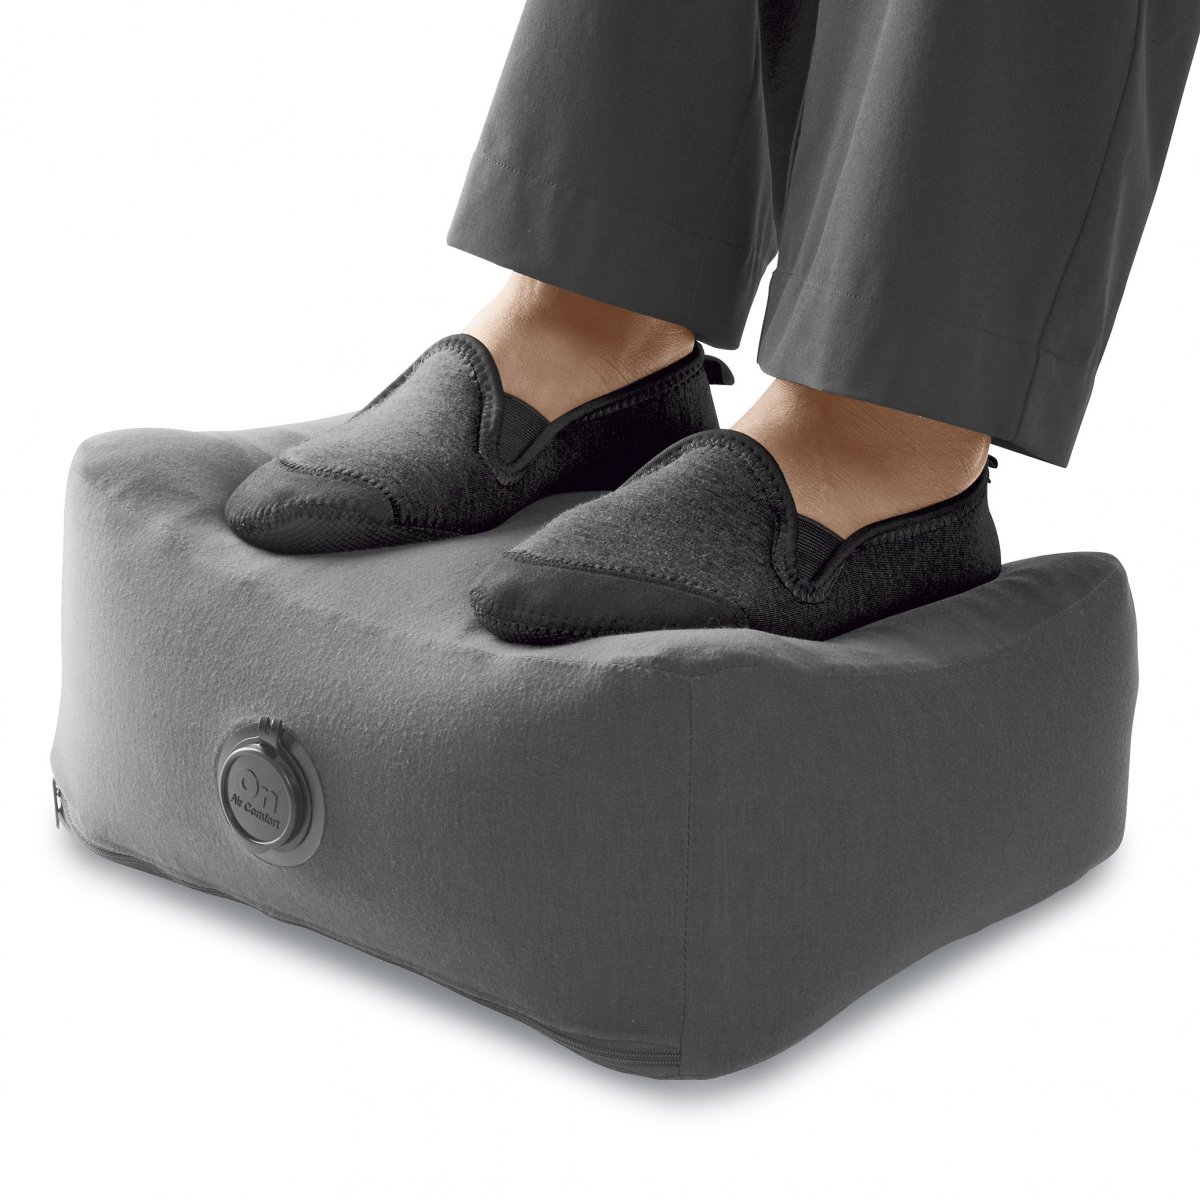 Travel Product Review - Crazy Gadgets You May Just Need - Footrest